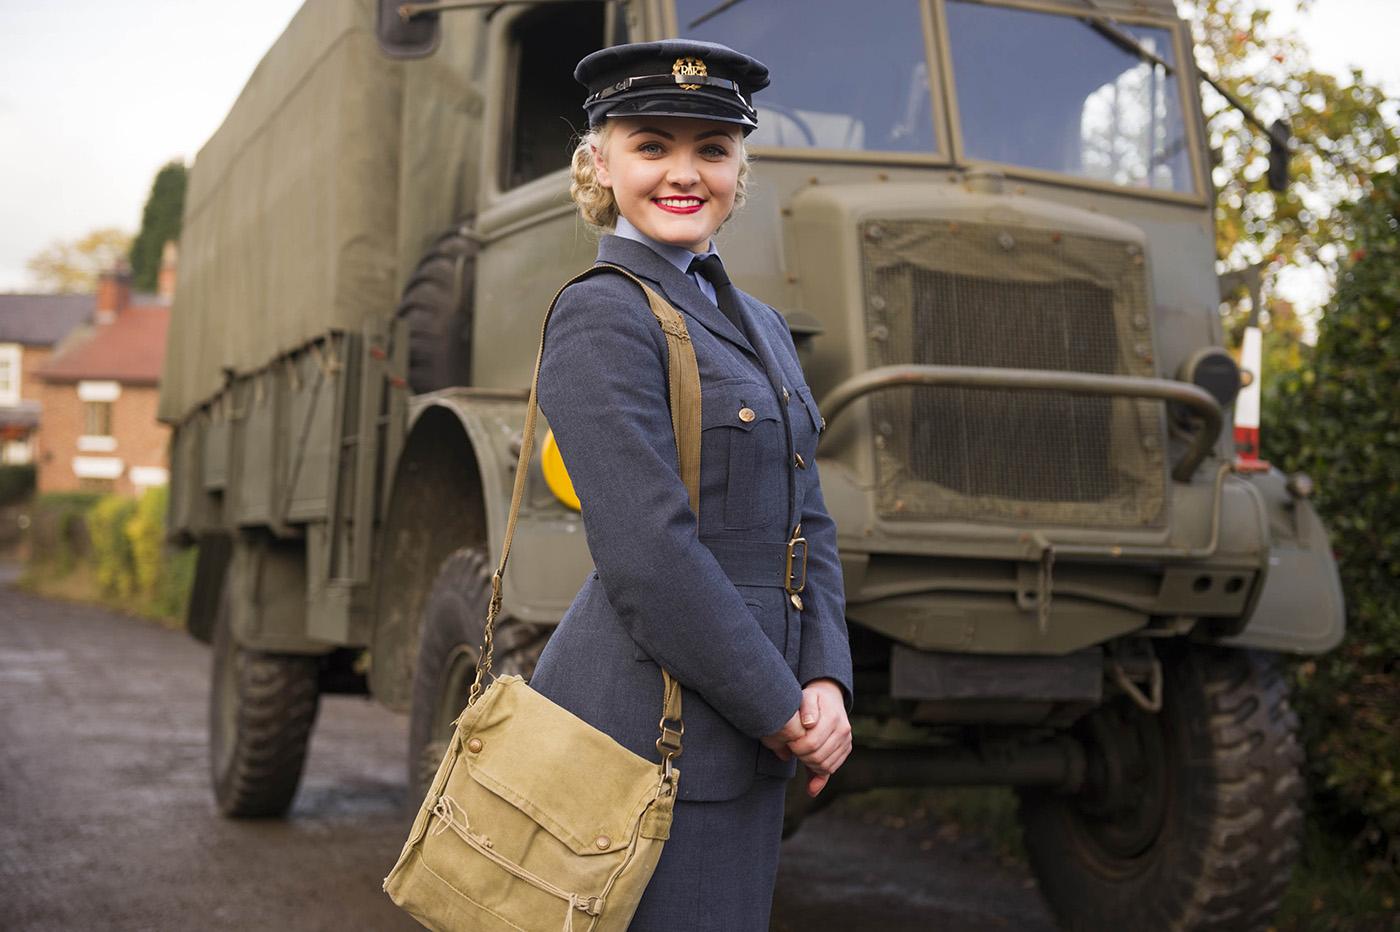 Jodie Hamblett as Jenny in 'Home Fires.' Photo: iTV Studios and MASTERPIECE